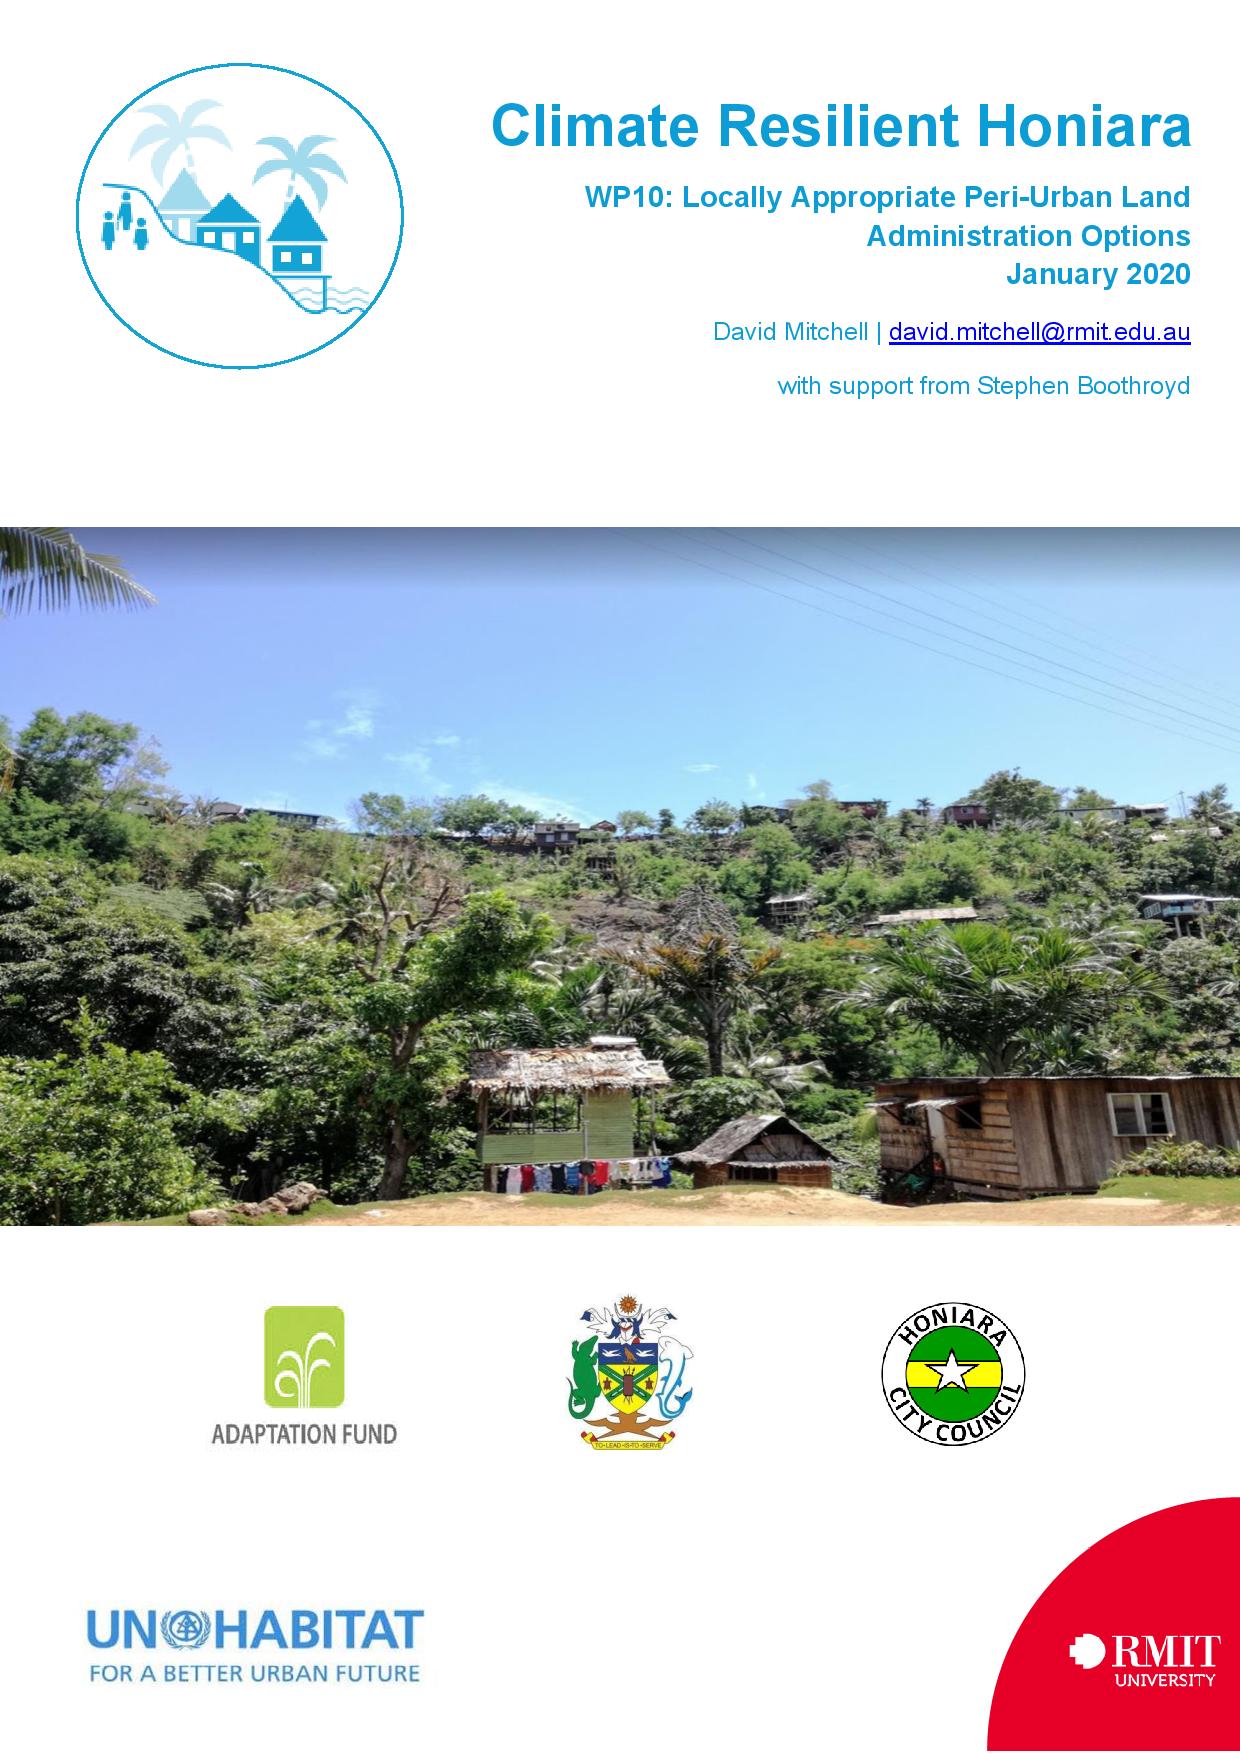 Solomon Islands: Climate Resilient Honiara: Locally Appropriate Peri-Urban Land Administration Options